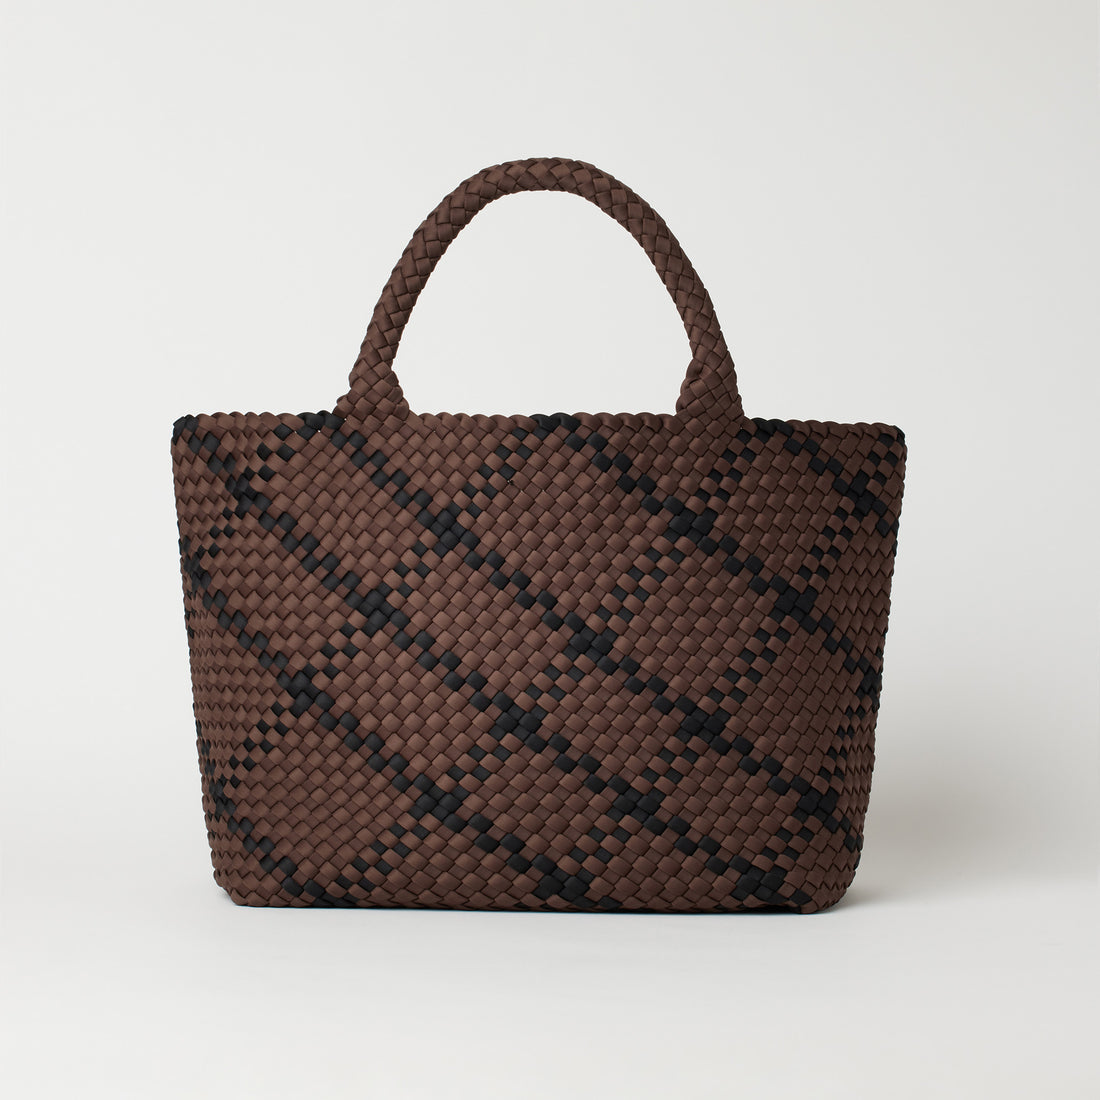 Andreina Bags Siempre tote bag in brown colour with black criss cross stripes. Colour name is cocoa. Large size yet lightweight. Handmade, interlaced material, synthetic material, water resistant, machine washable. Designed in Sydney, Australia.